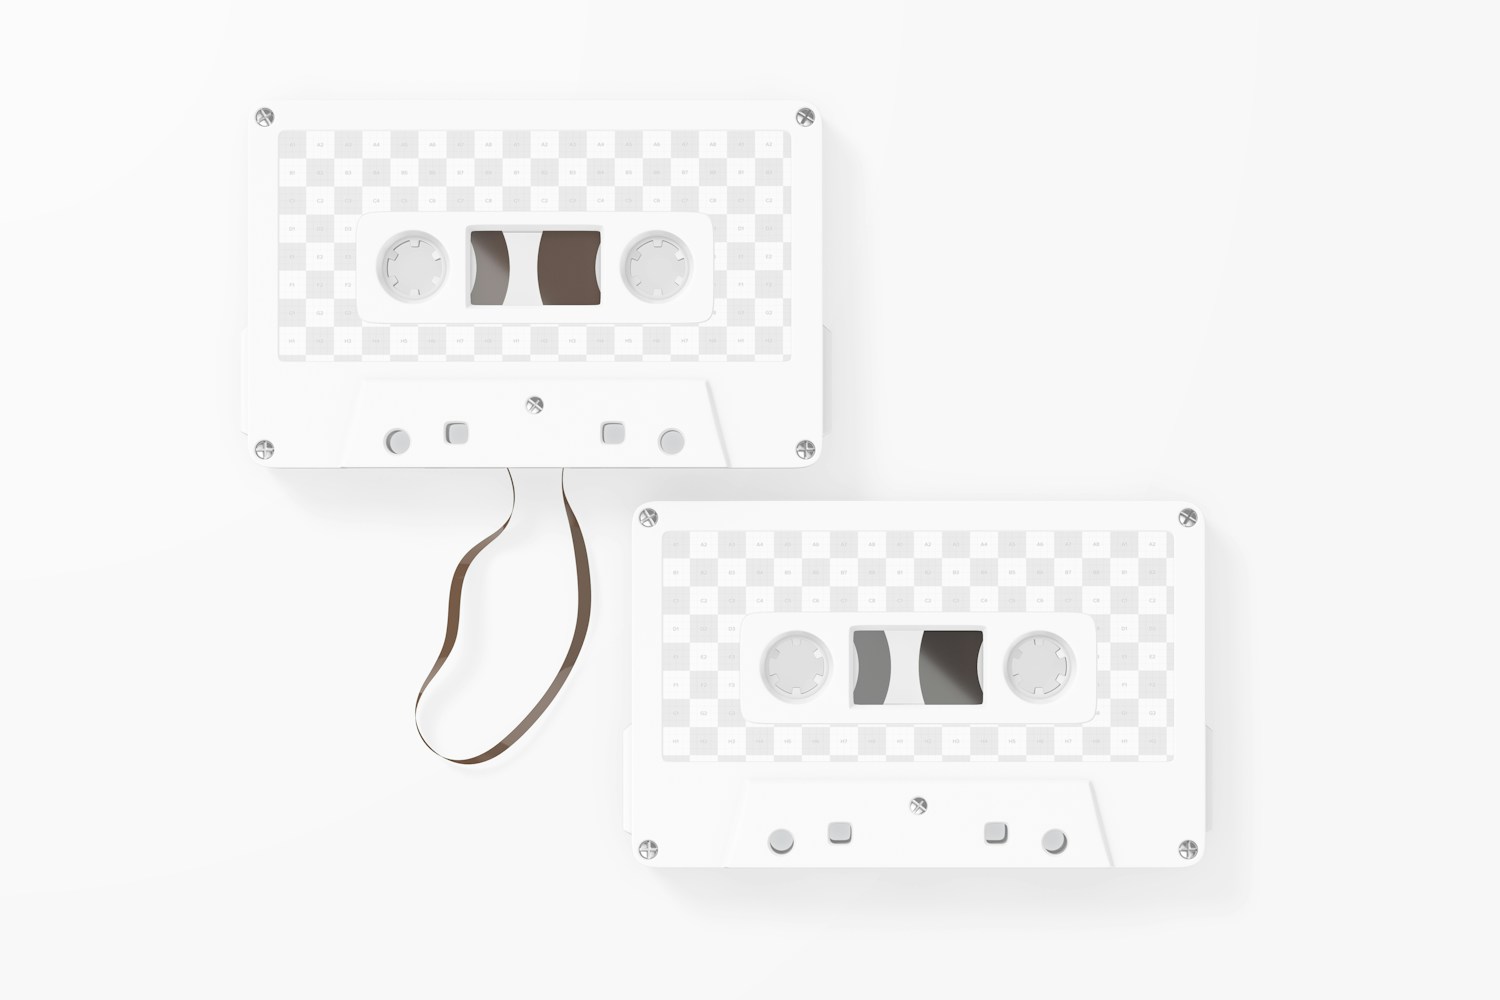 Cassette Tapes Mockup, Top View